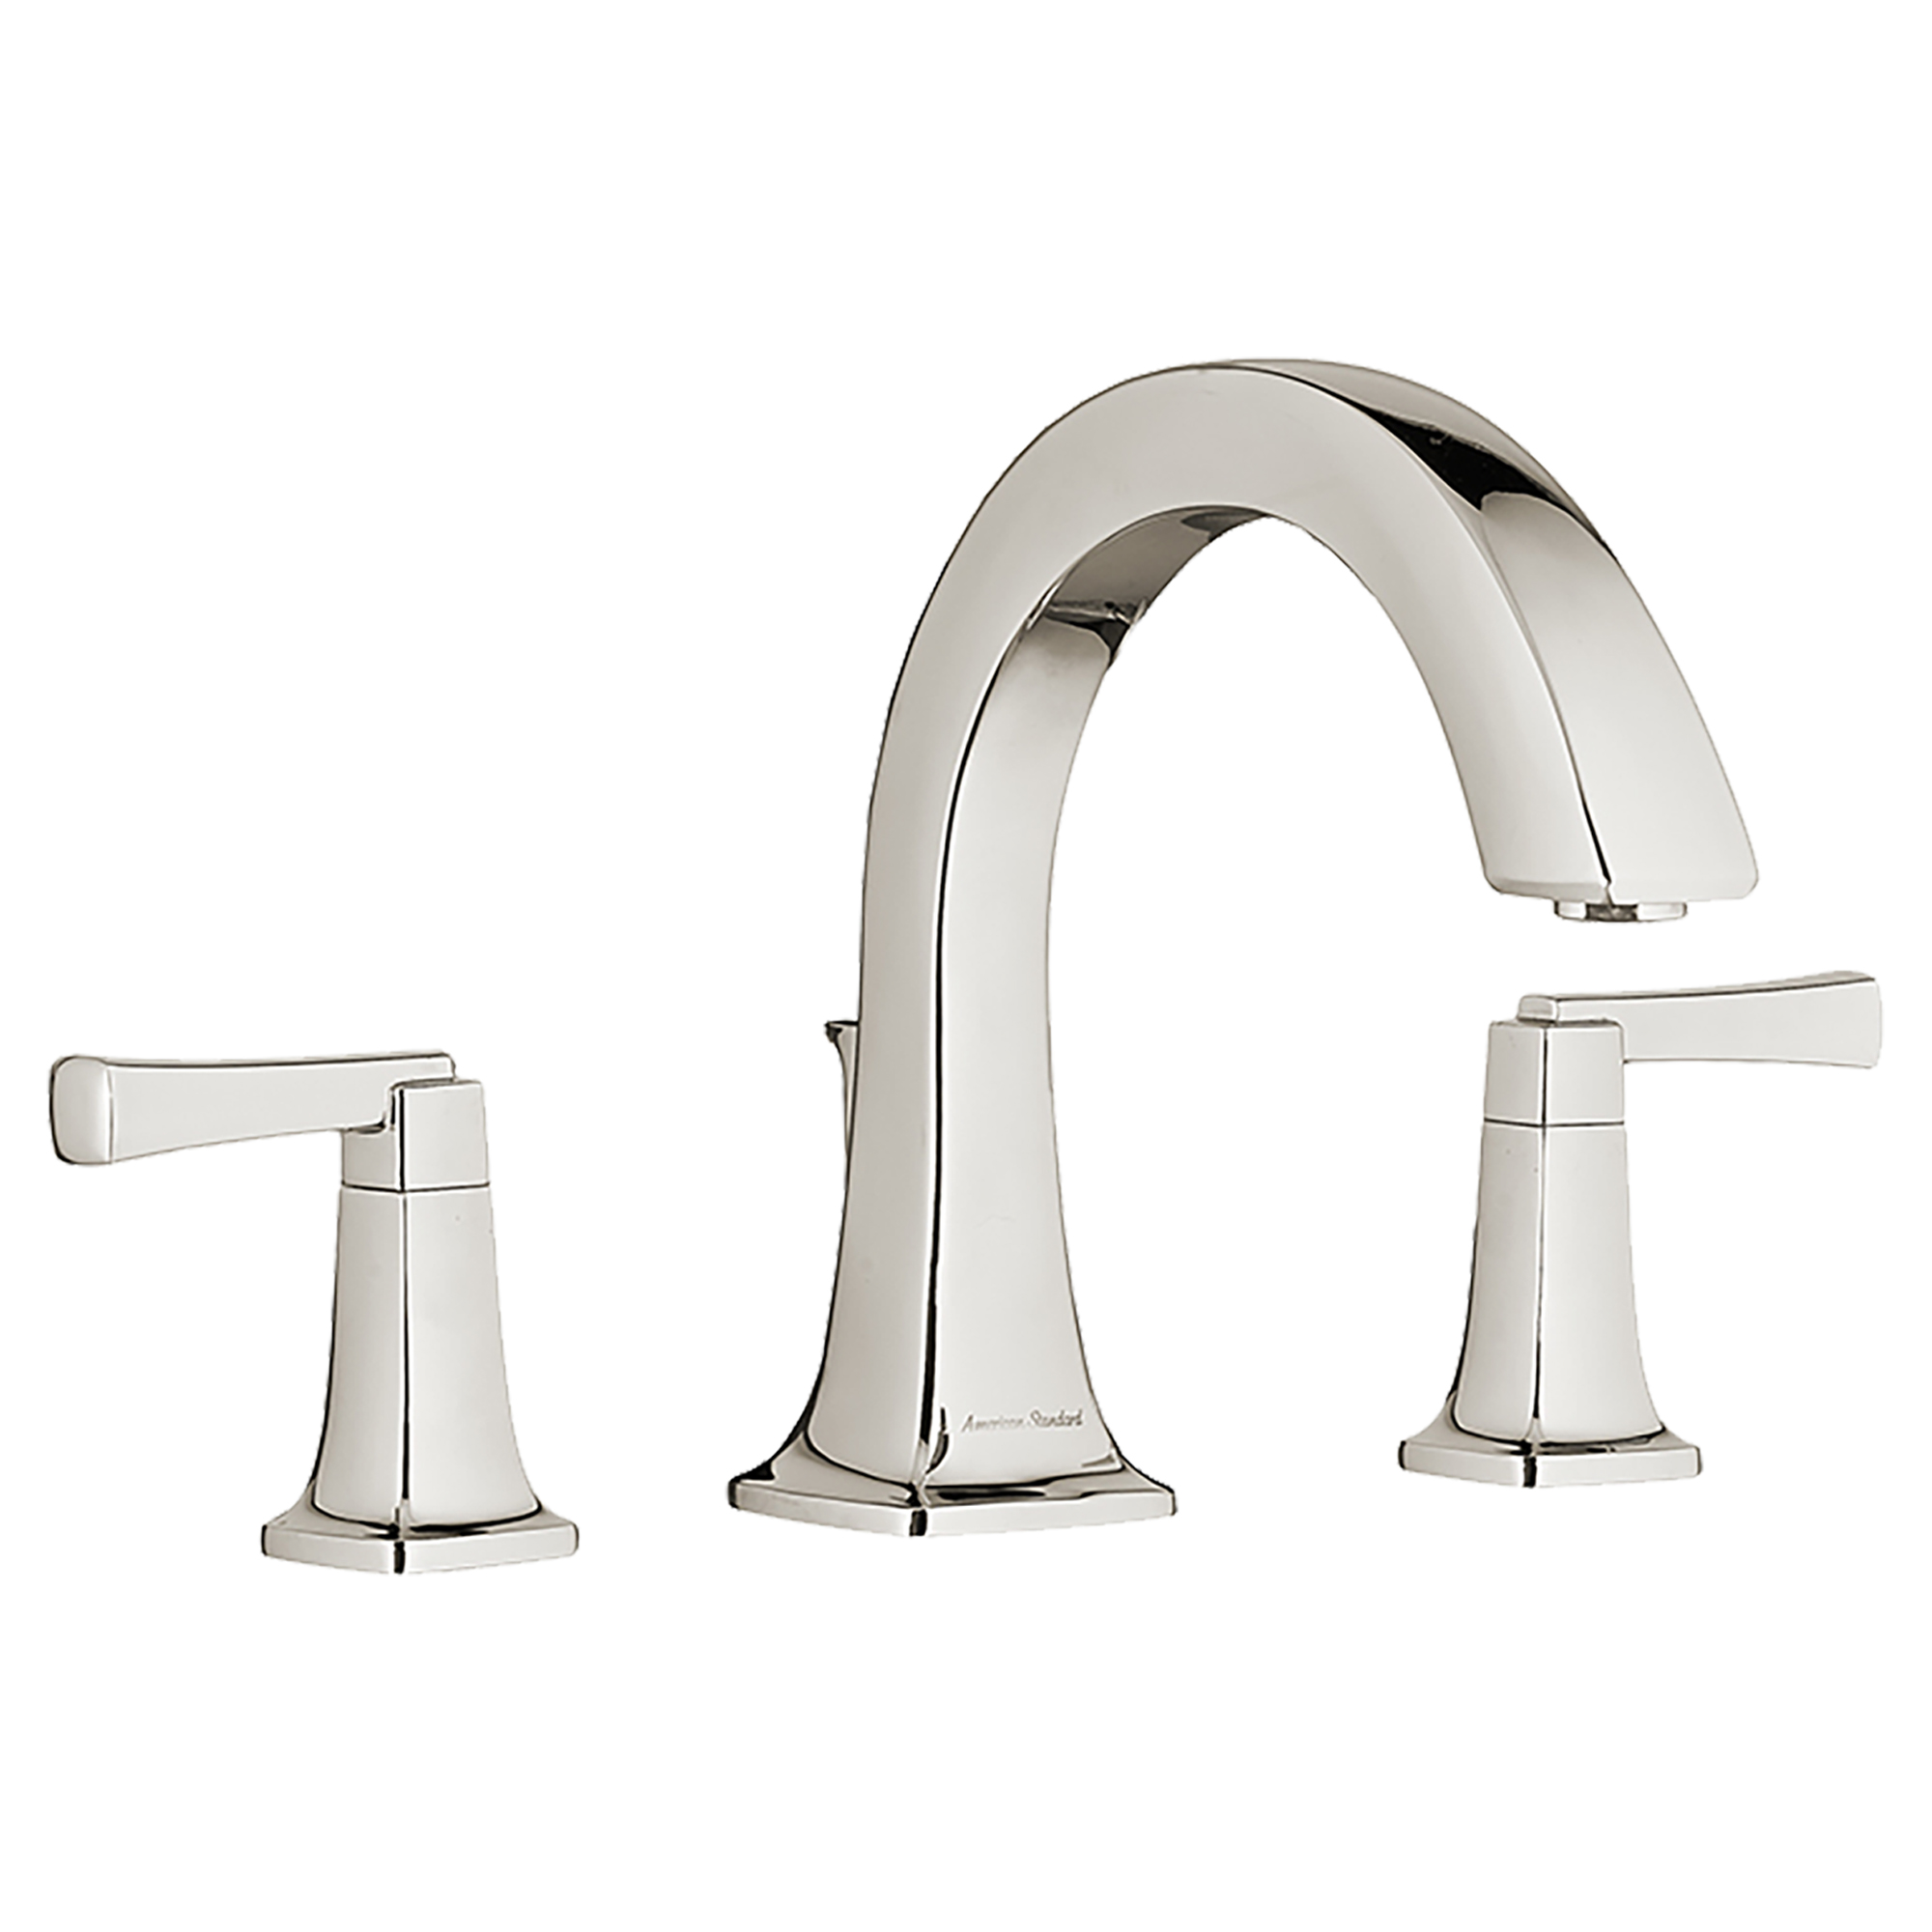 Townsend Bathtub Faucet for Flash Rough-in Valve with Lever Handles